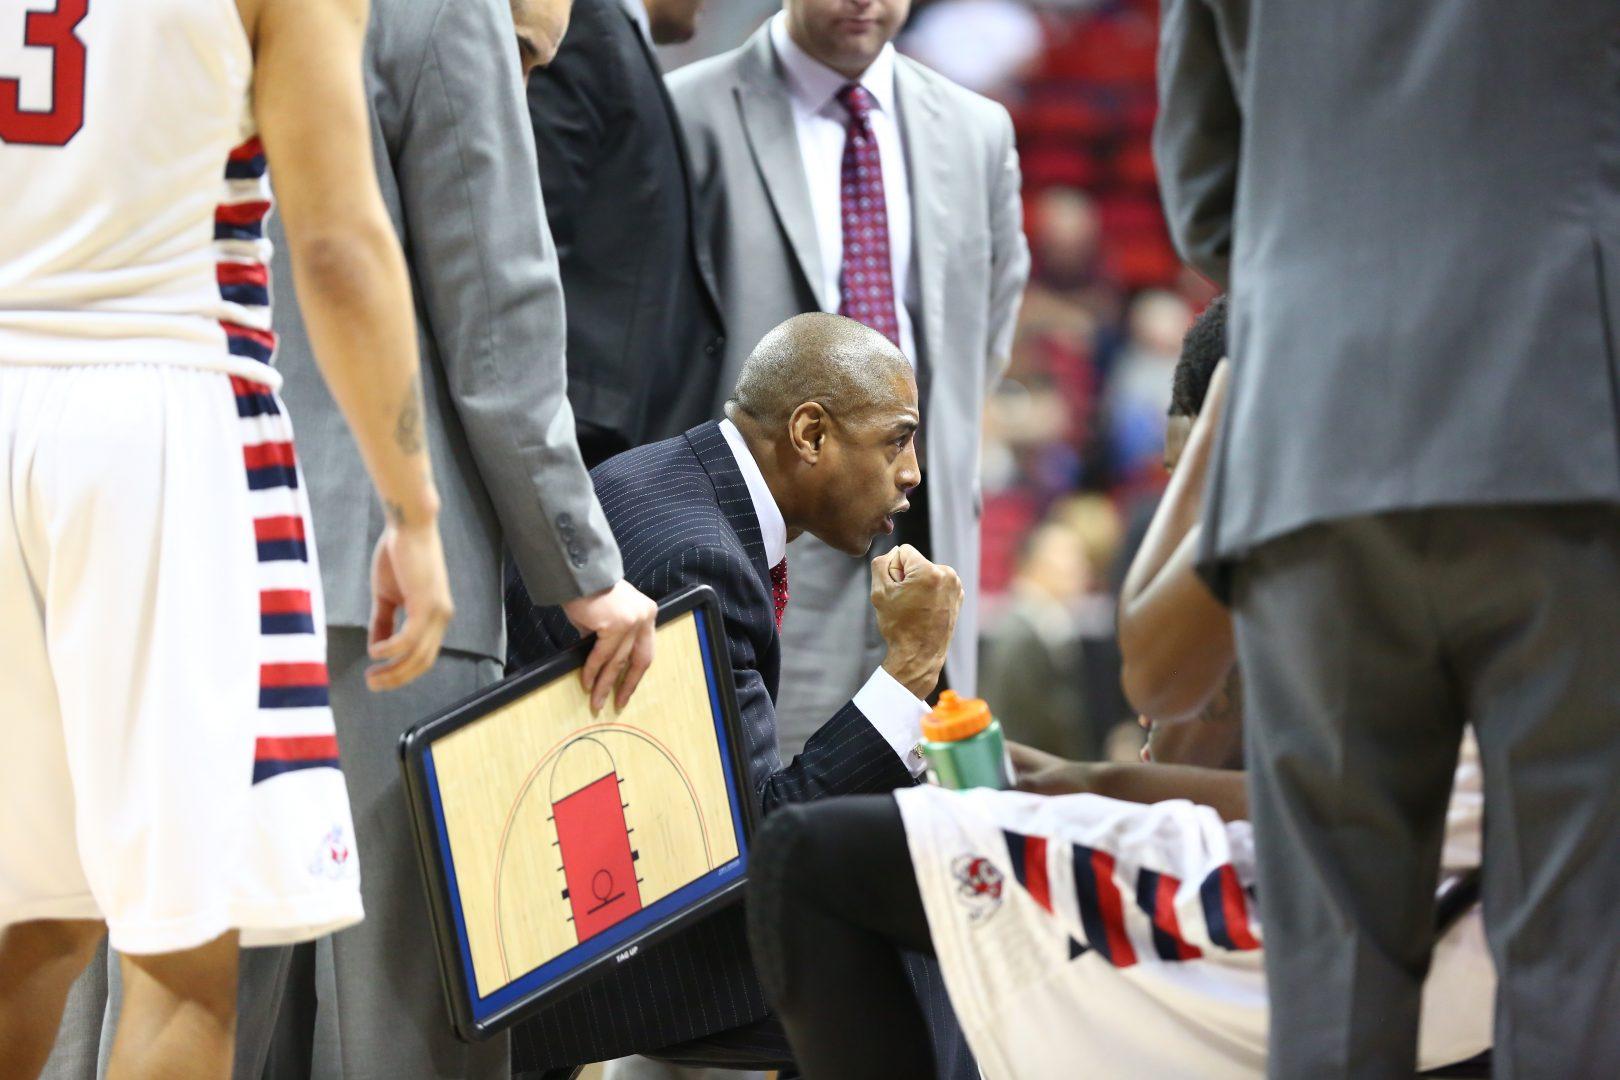 Fresno State head coach Rodney Terry instructs his team during a timeout in the Bulldogs 61-59 victory over Air Force Wednesday night. Photo by Khlarissa Agee/The Collegian